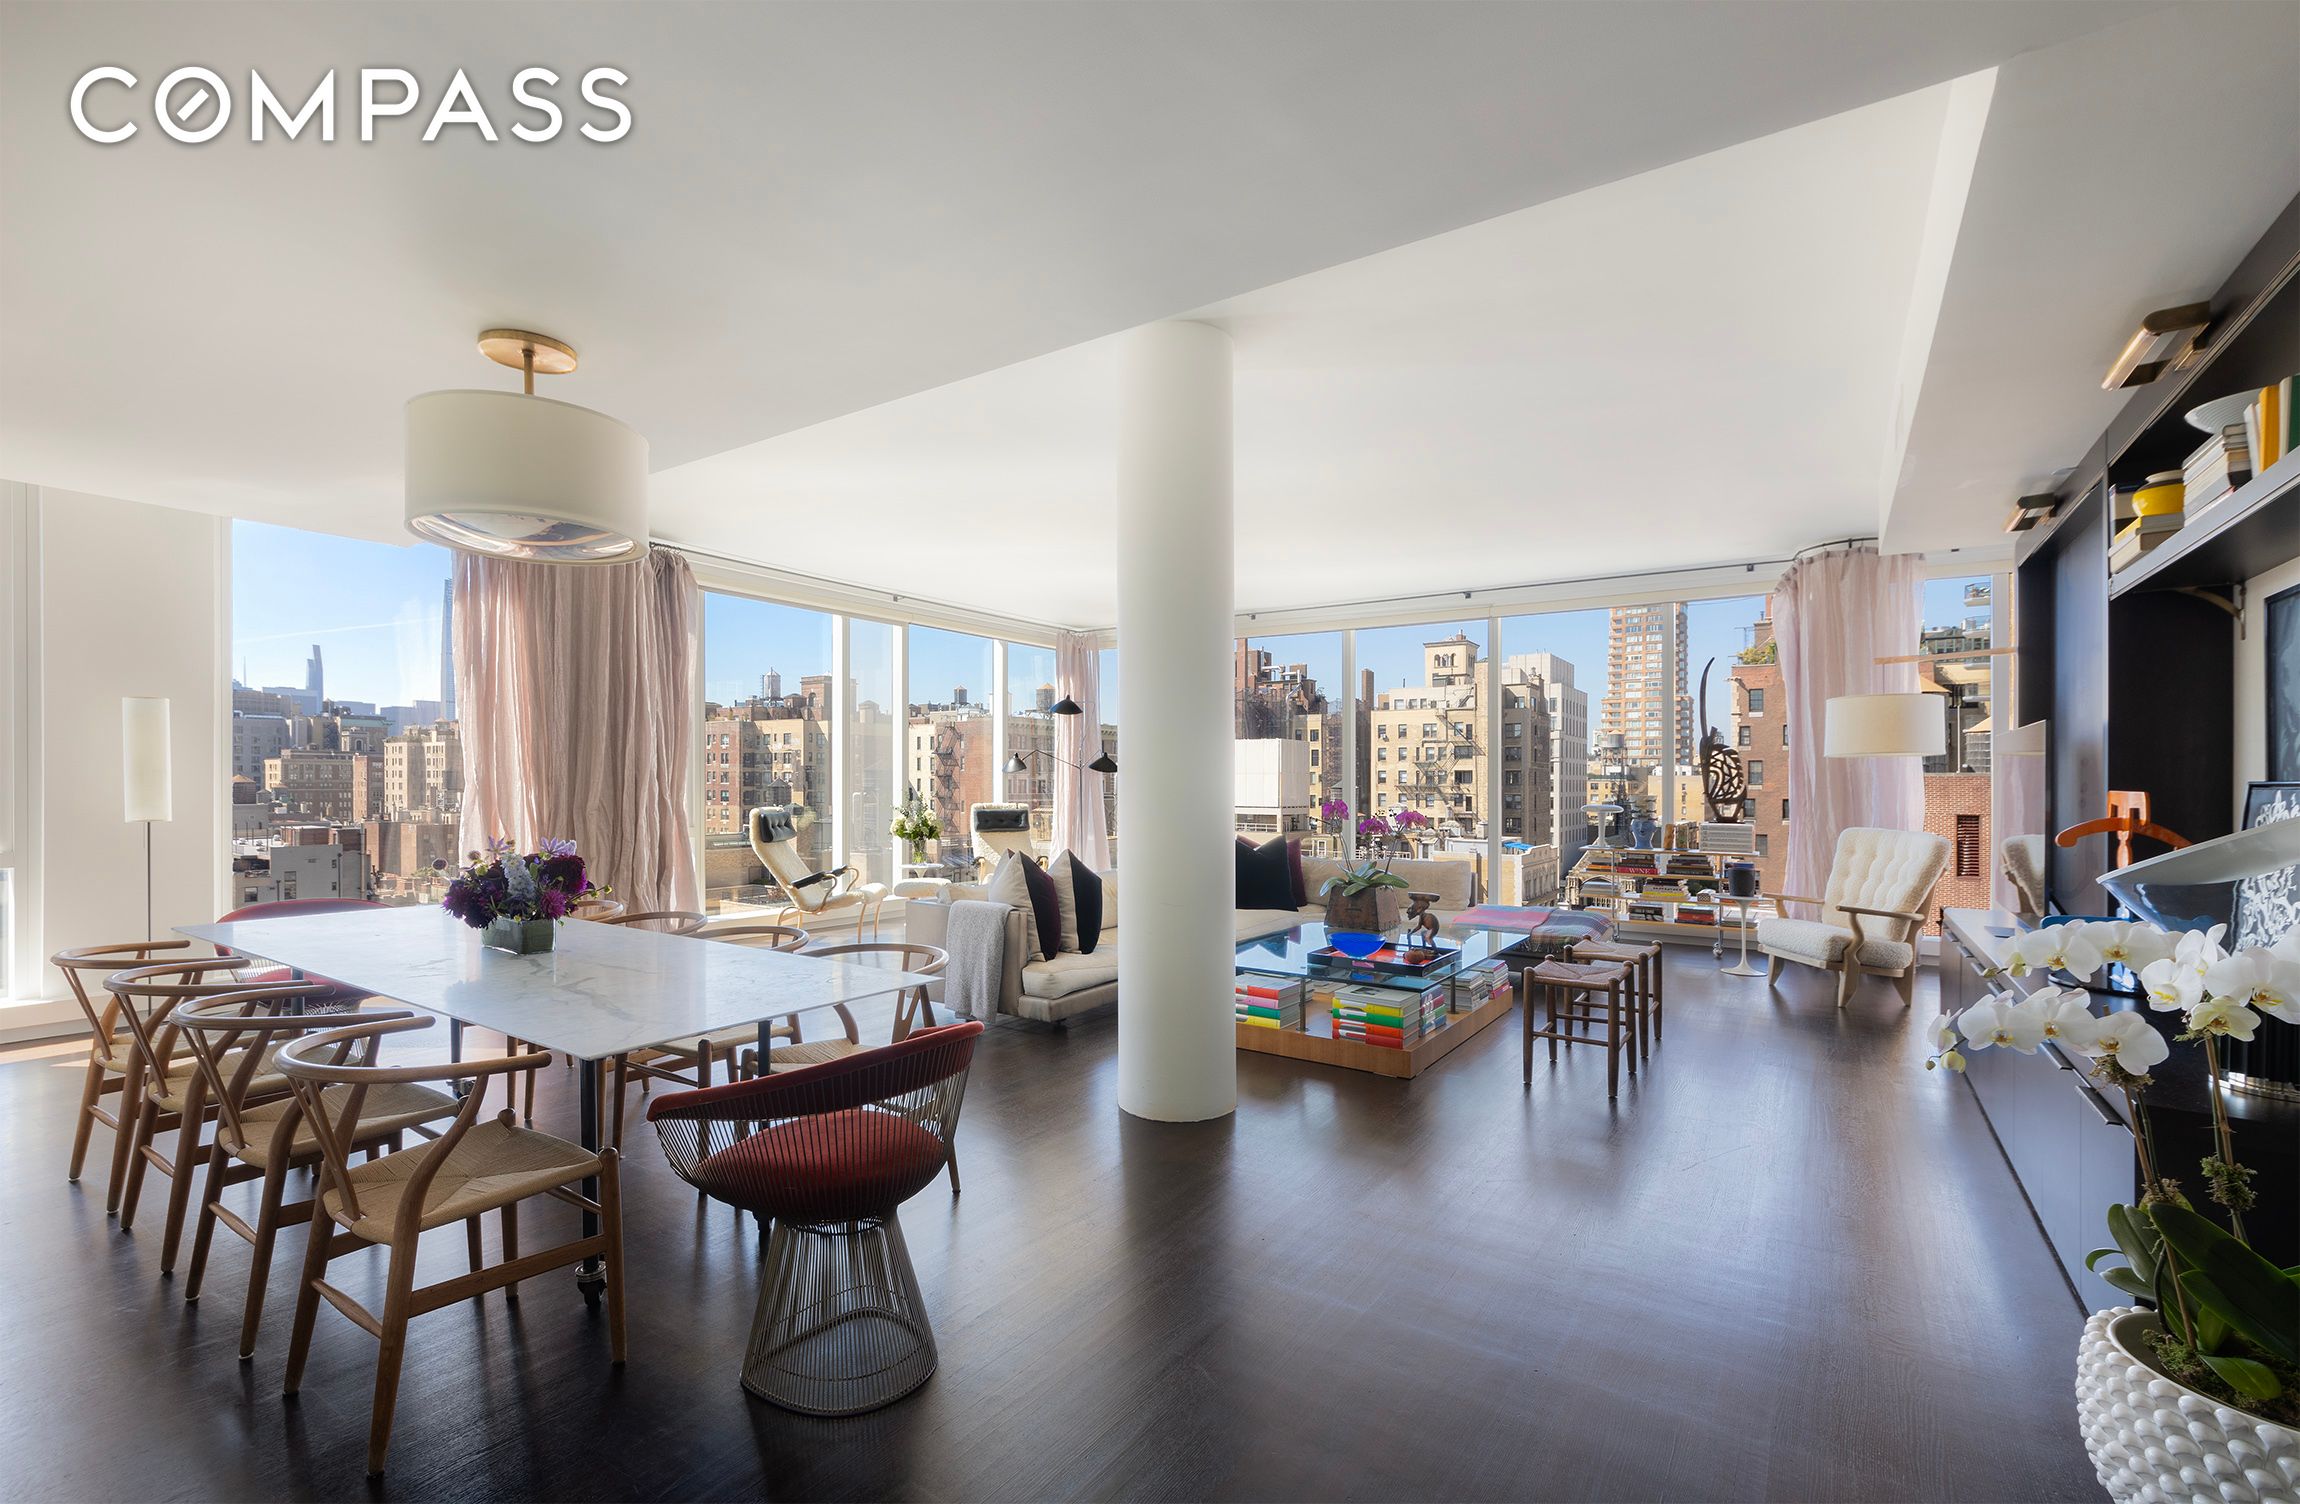 151 East 85th Street 14A, Upper East Side, Upper East Side, NYC - 5 Bedrooms  
5.5 Bathrooms  
12 Rooms - 